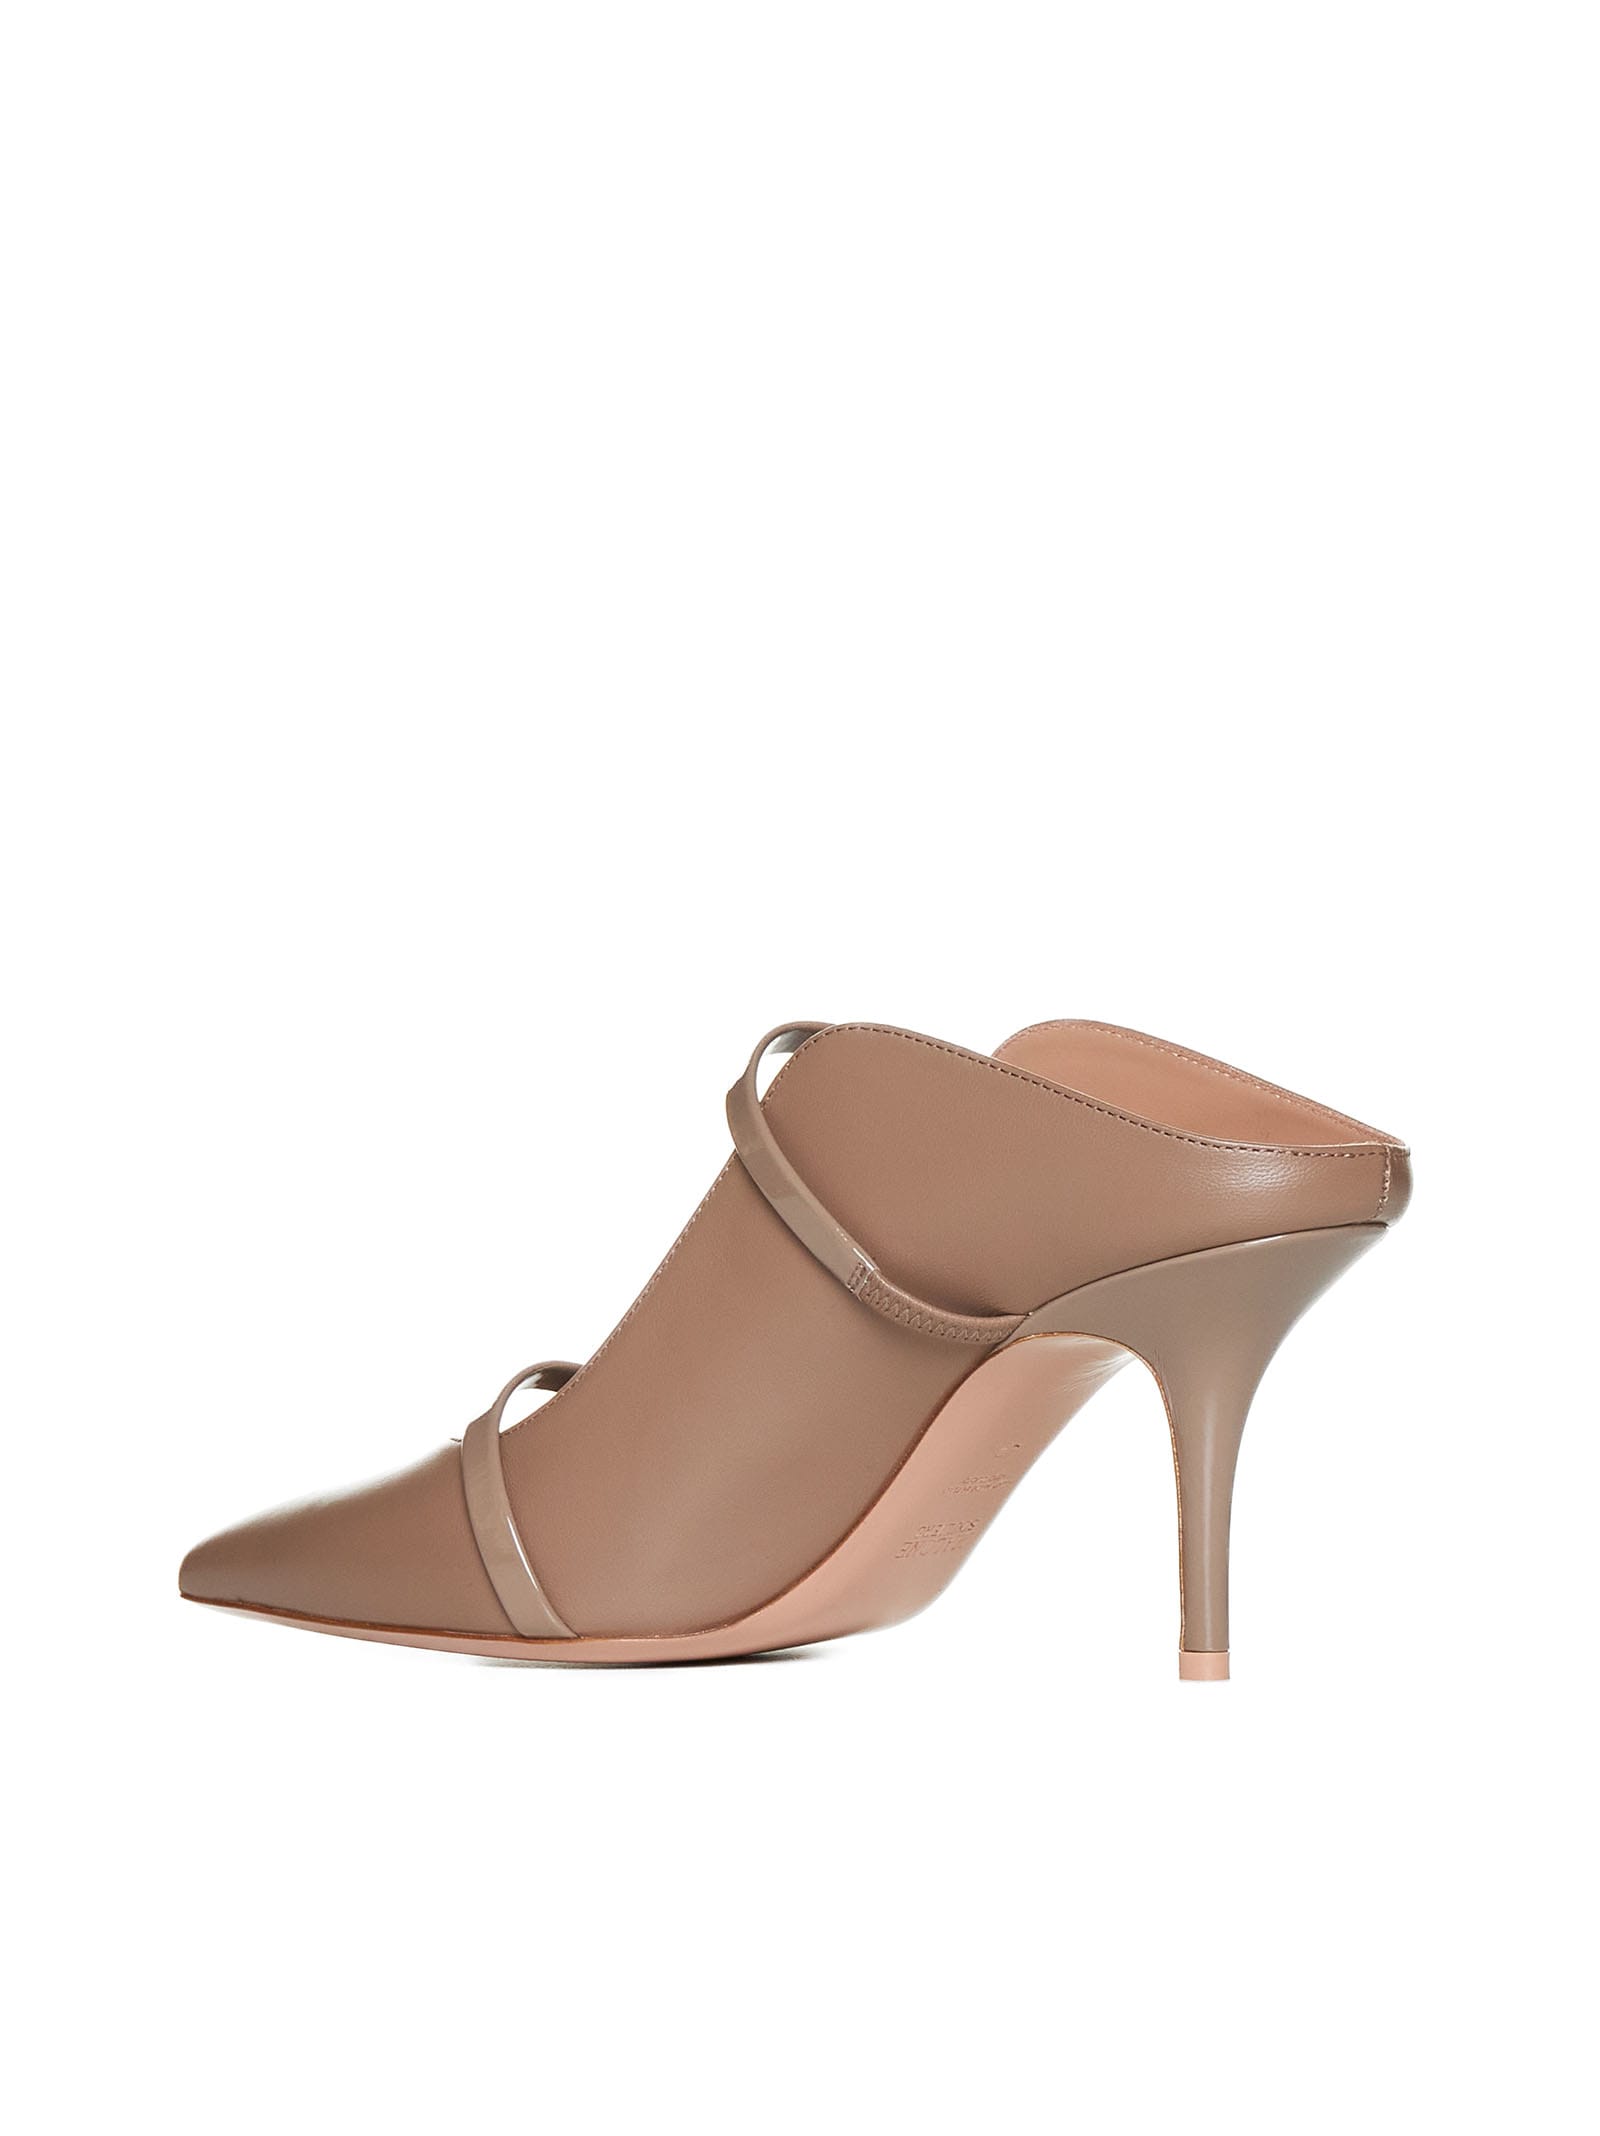 Shop Malone Souliers Sandals In Taupe/taupe